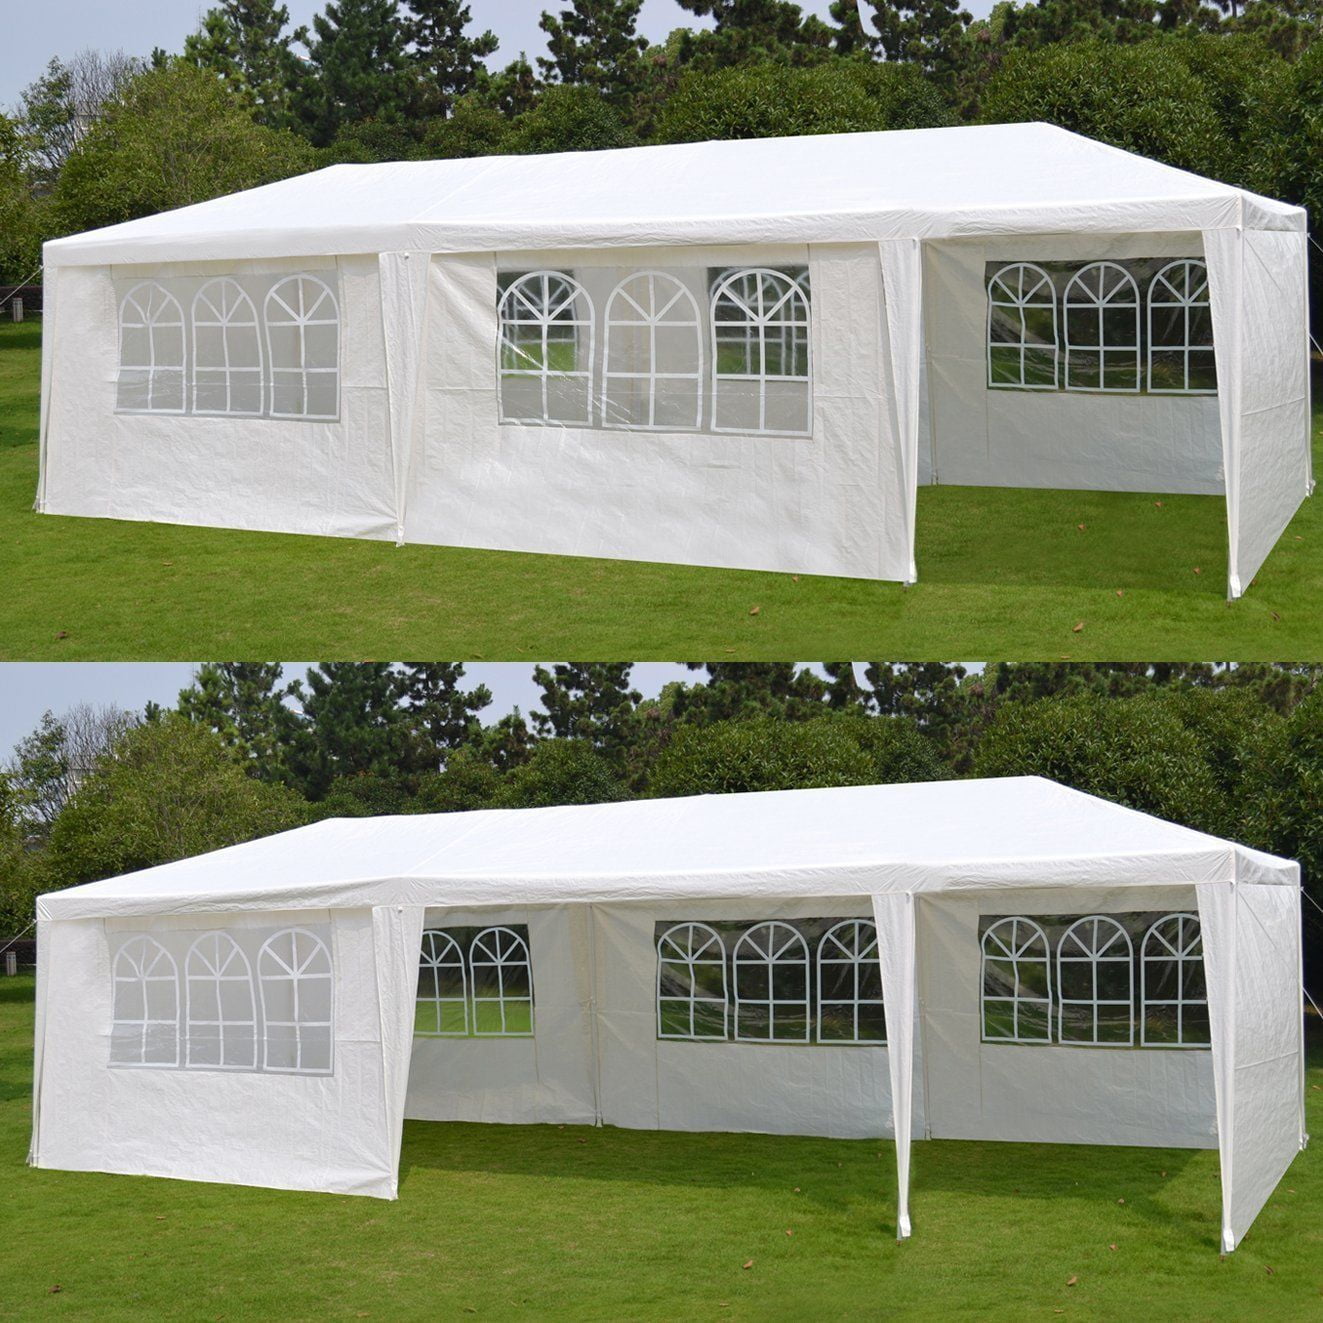 10'X 10'/20'/30' Canopy Wedding Party Tent Gazebo Pavilion w/Walls Cover Outdoor 